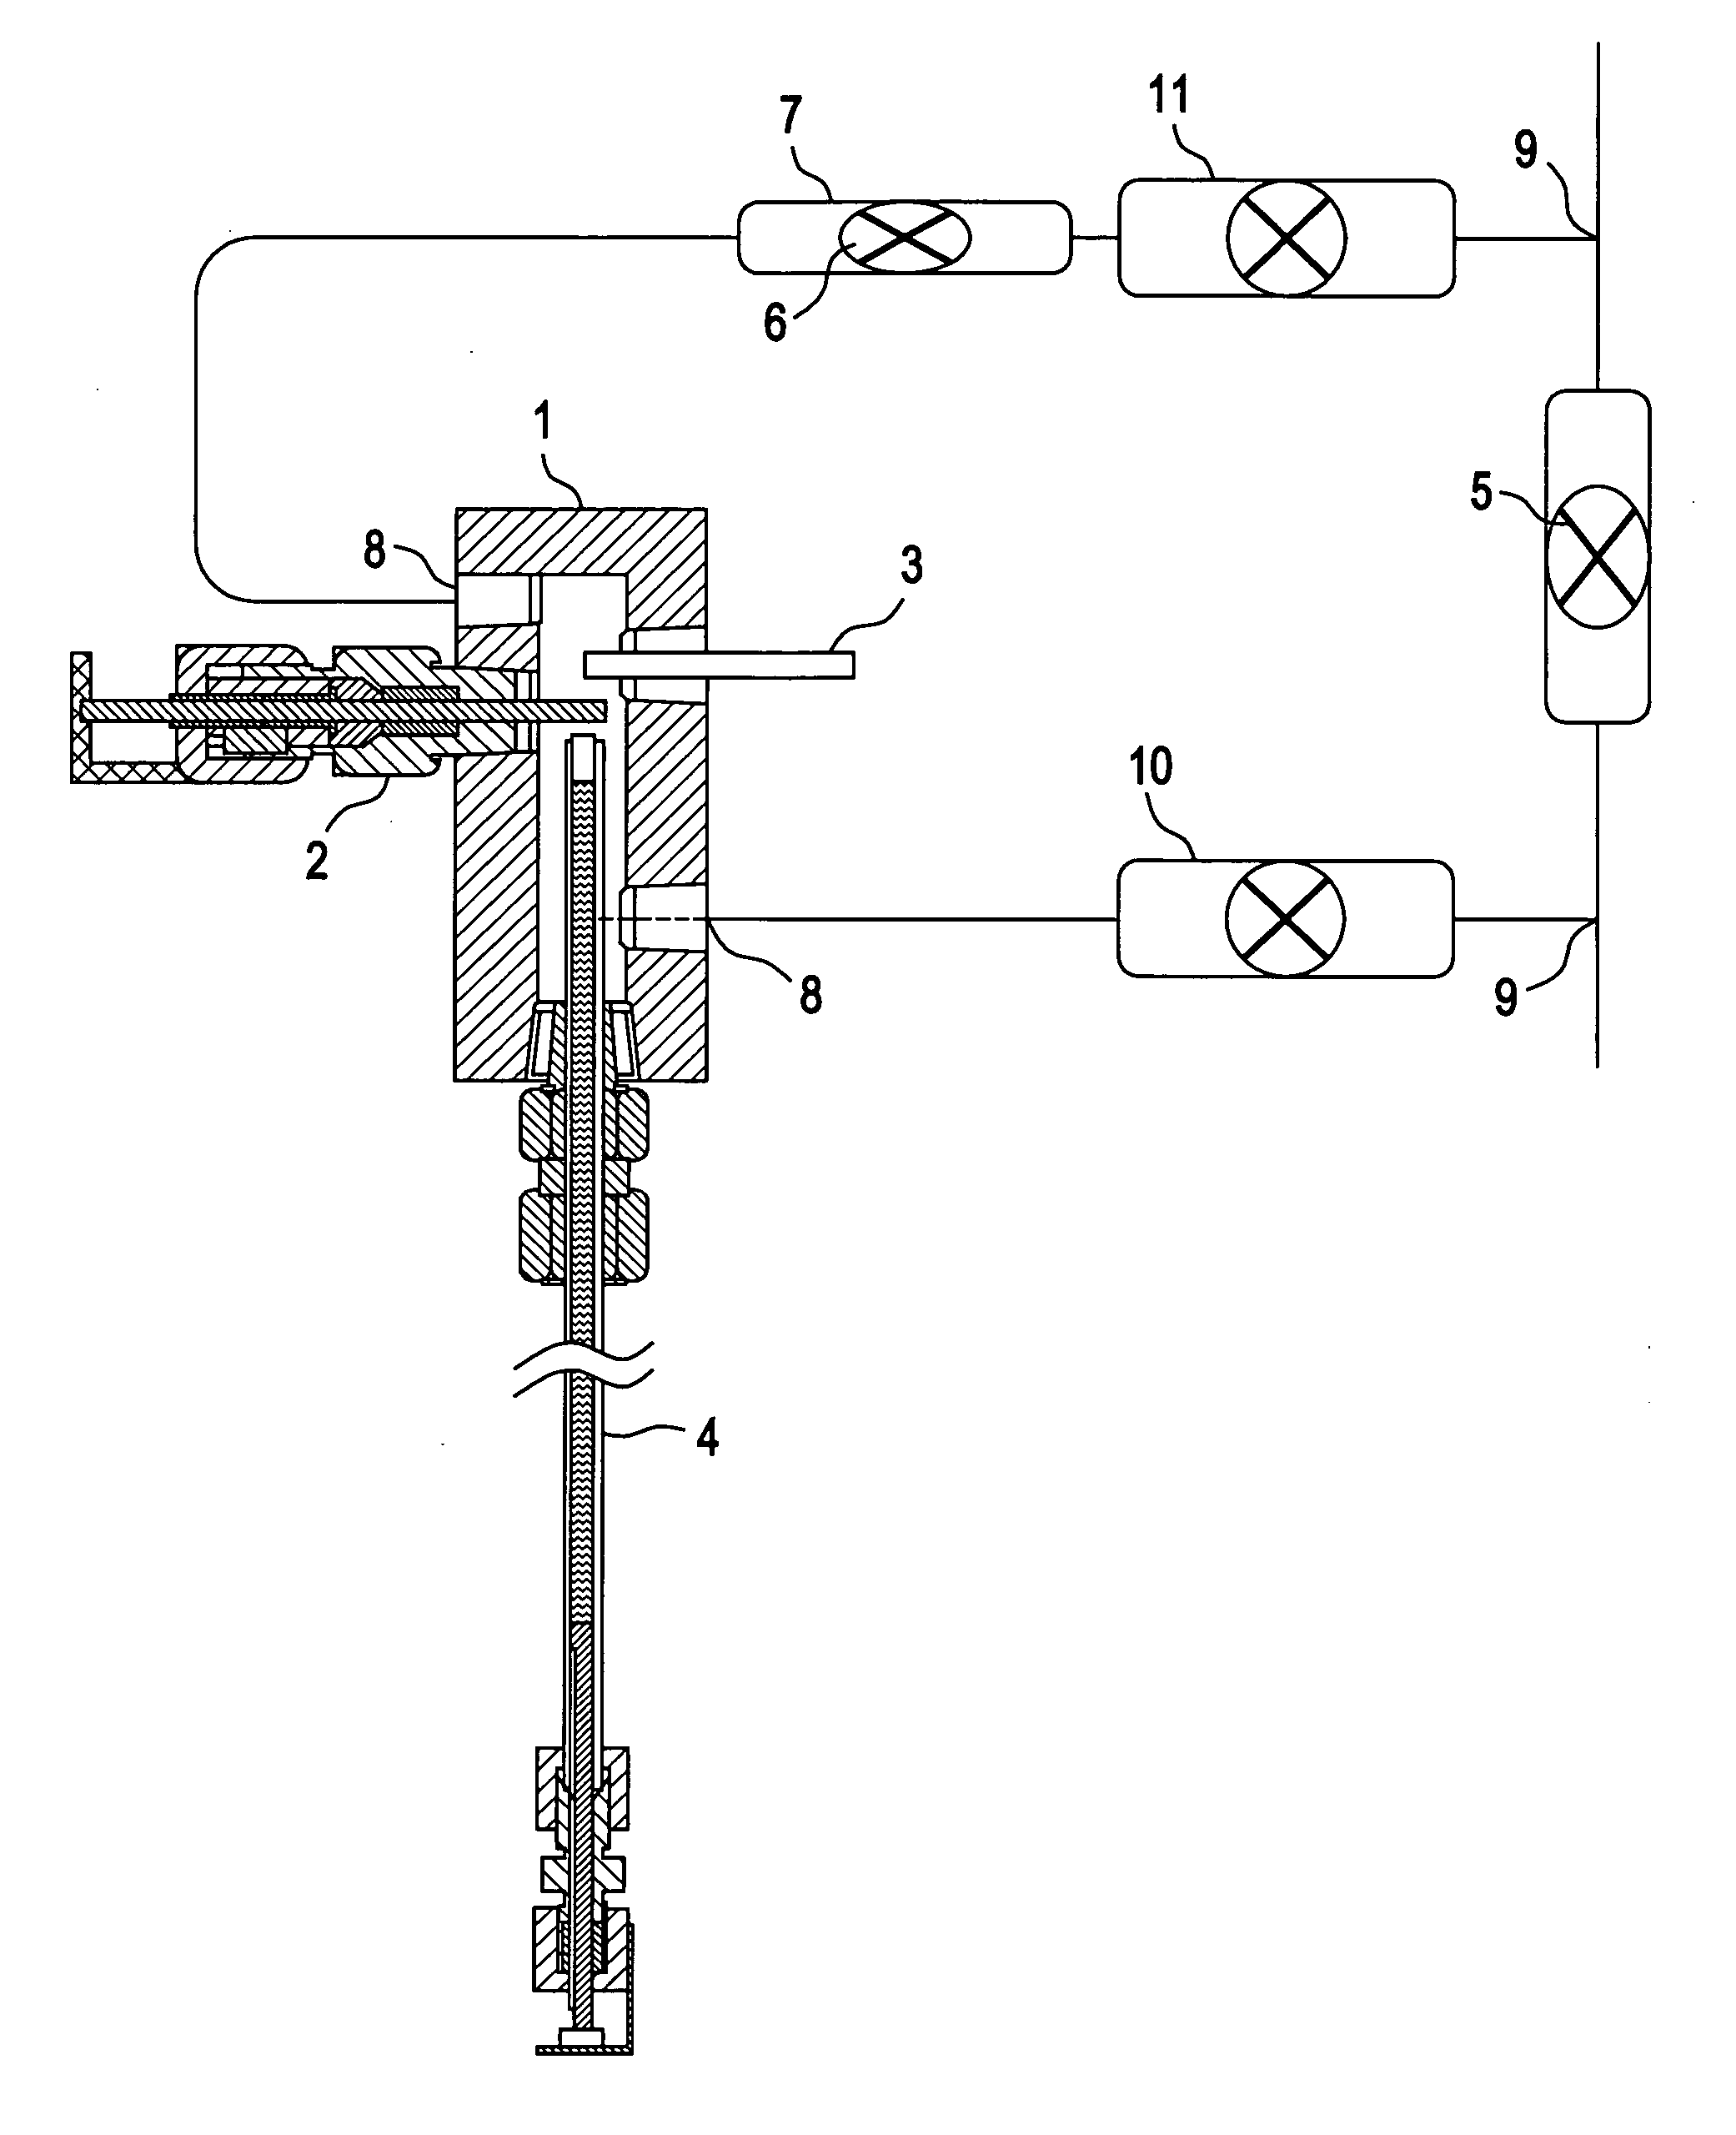 Method of inhibiting corrosion in hot water systems